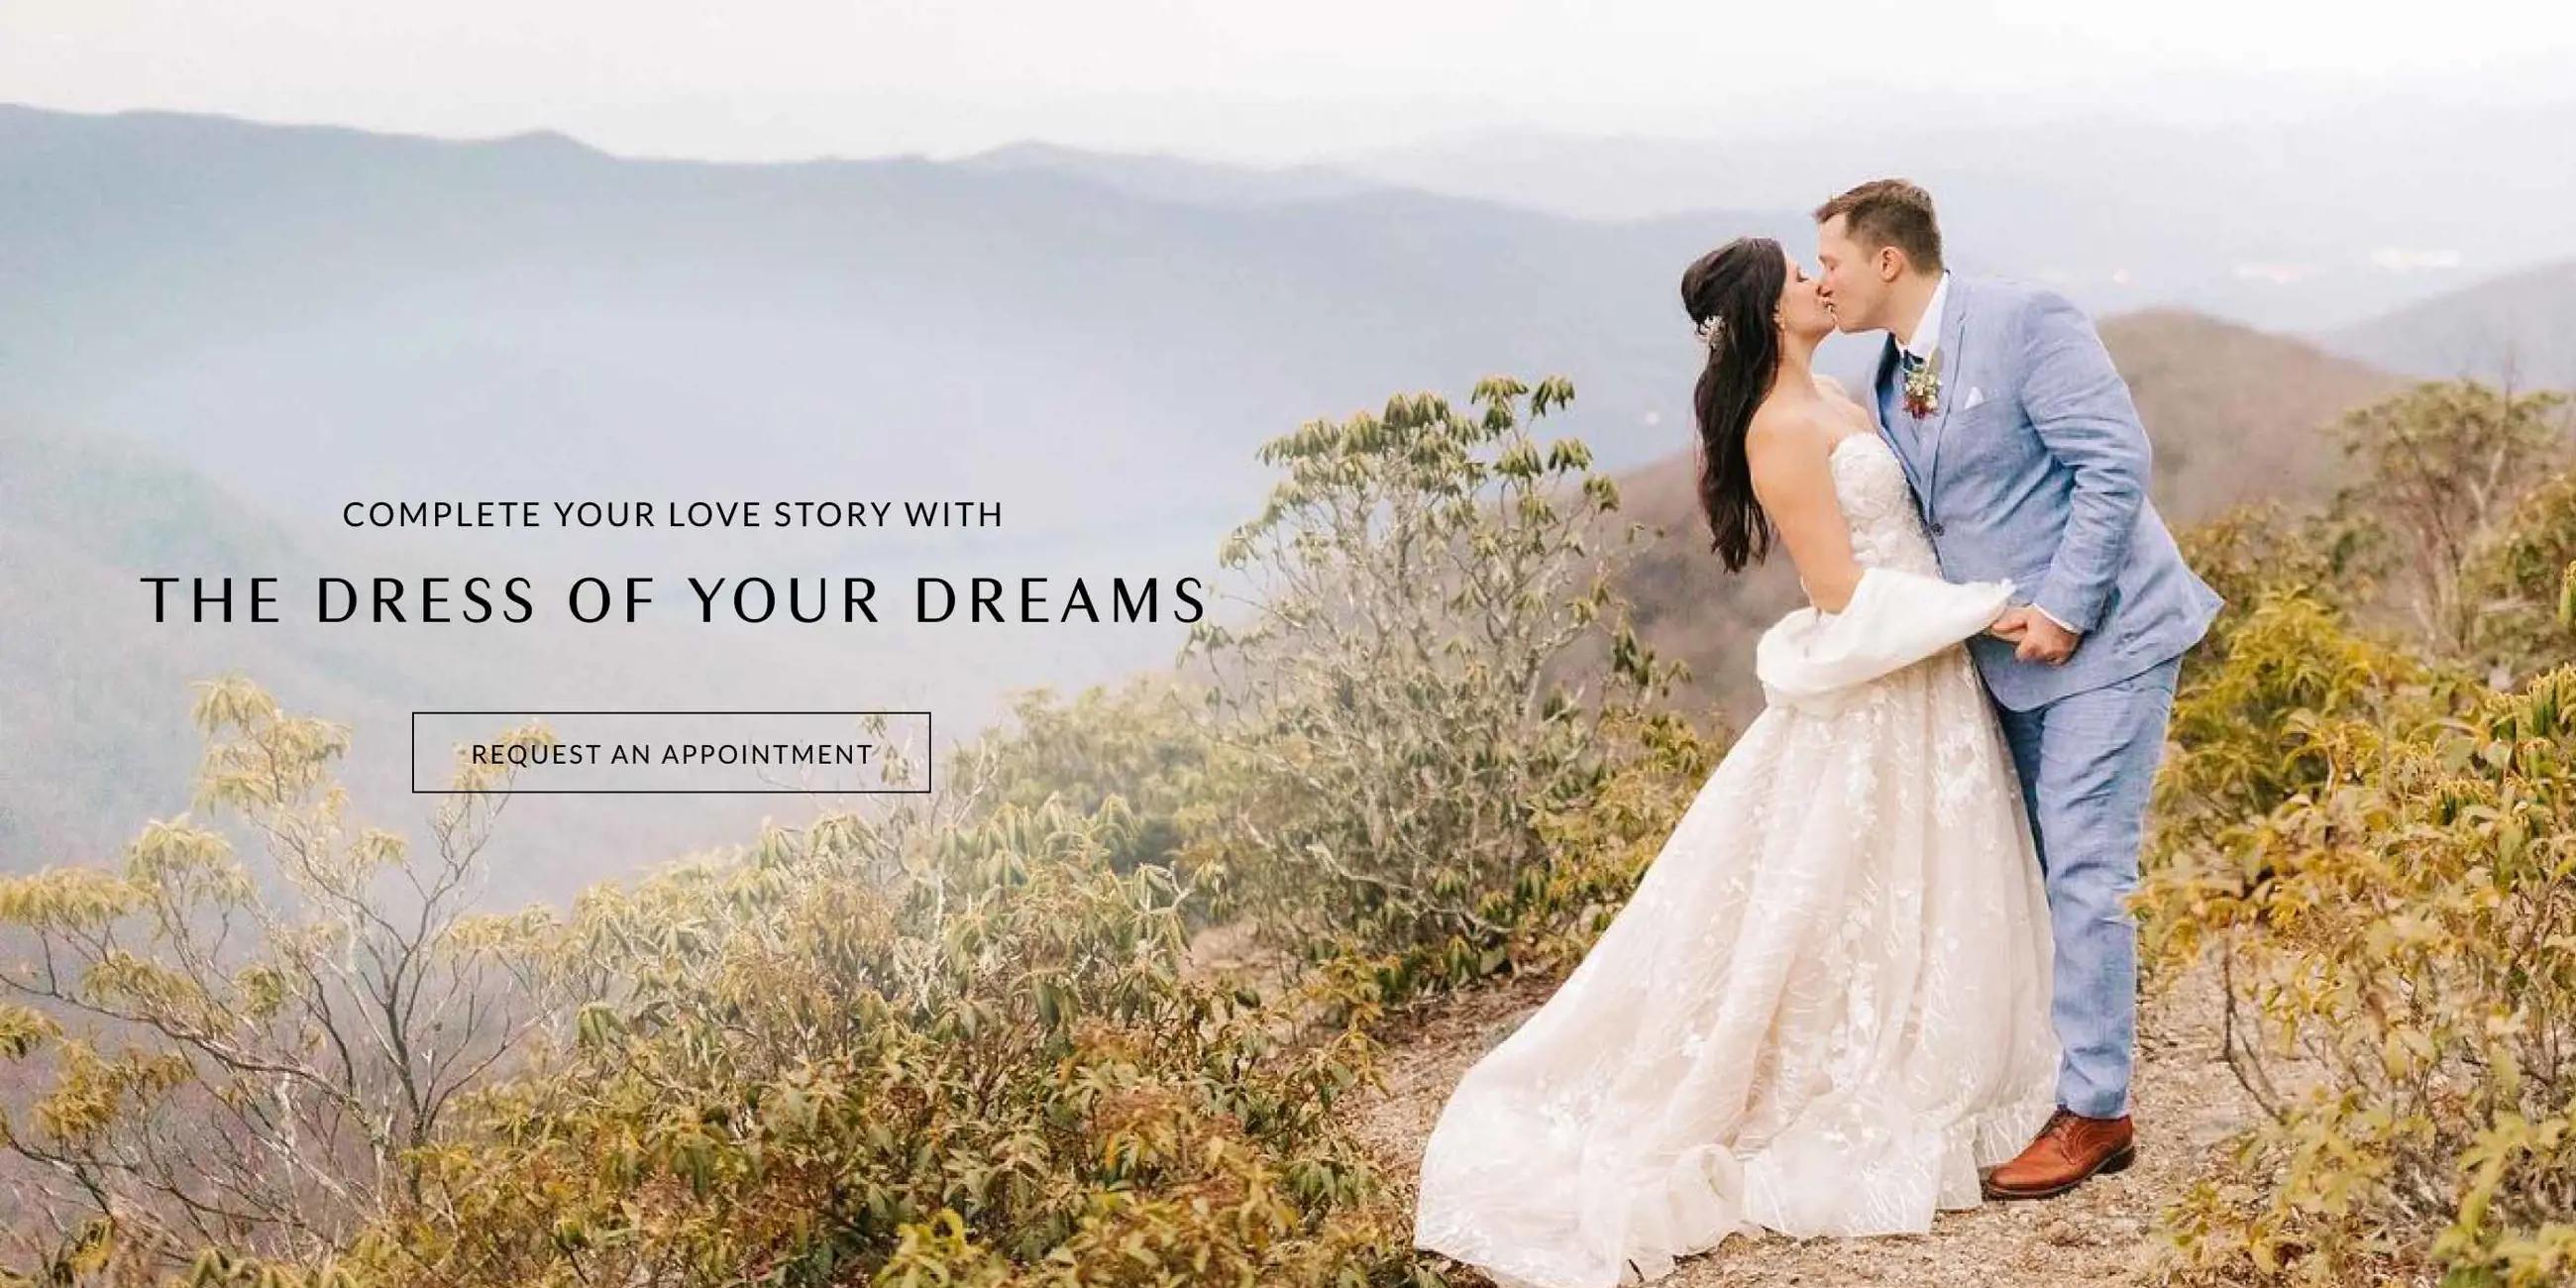 Find your dream wedding dress at Allure Bridal Boutique